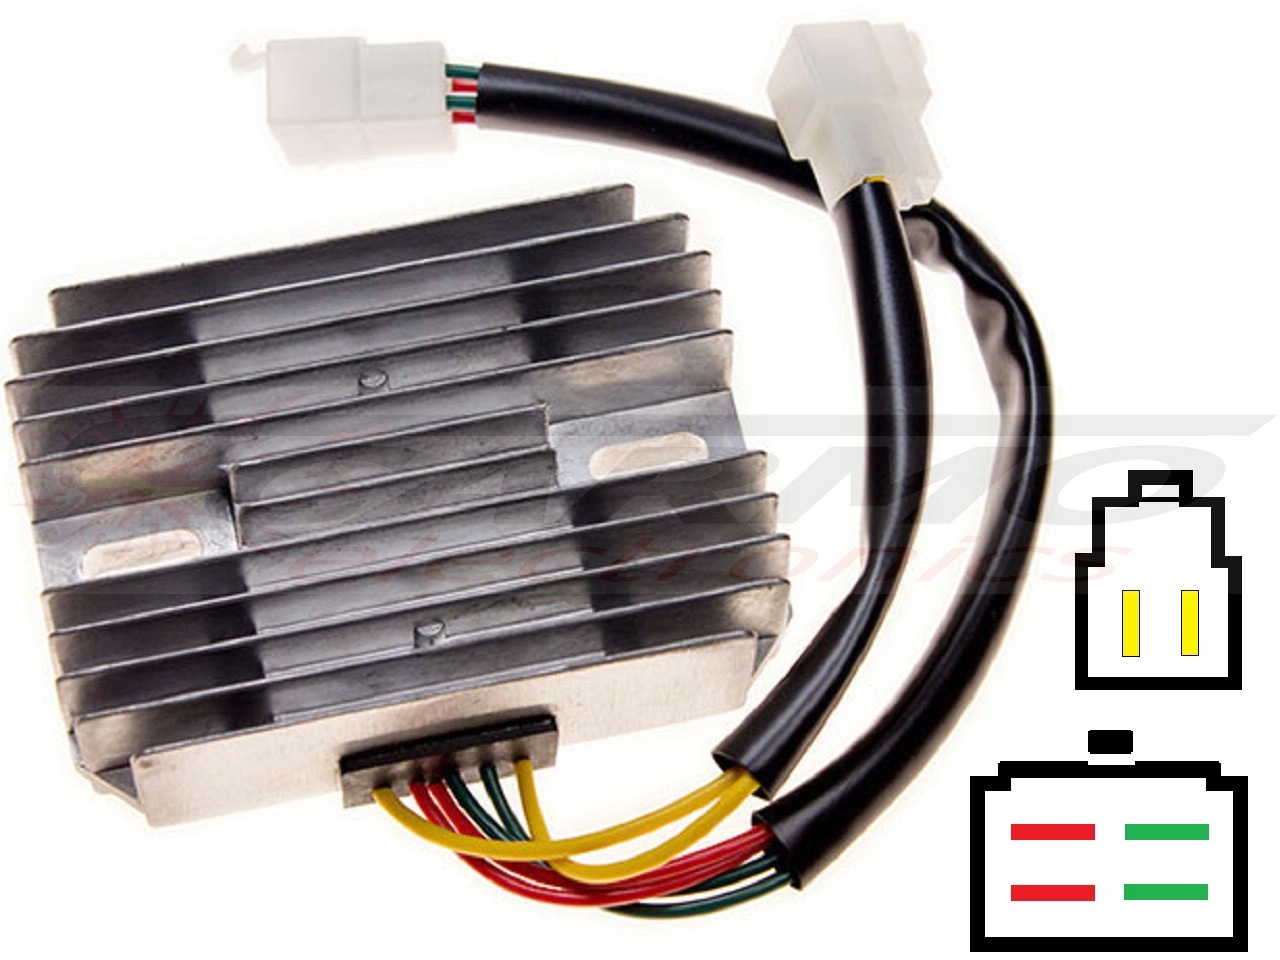 CARR521 Ducati MG 2-fase MOSFET Voltage regulator rectifier 54040131A / SH673-12 - Click Image to Close